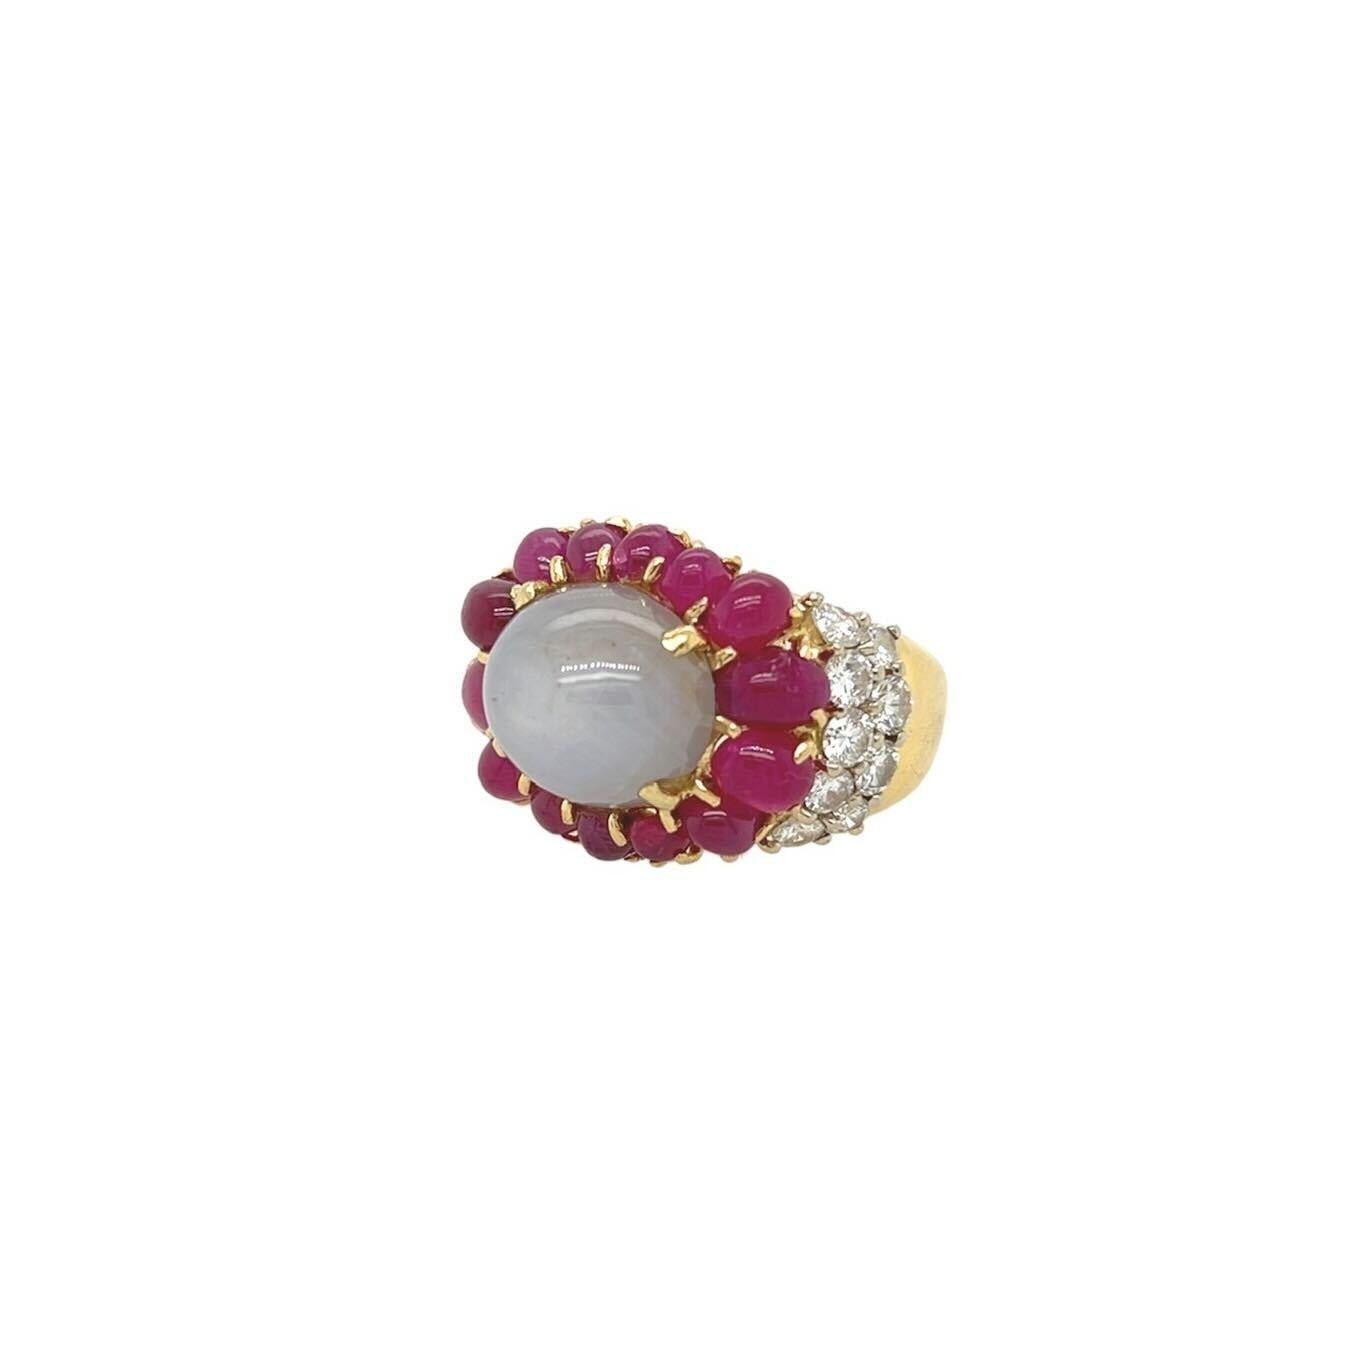 An 18 karat yellow gold, star sapphire, ruby and diamond ring.  Centering an oval gray star sapphire measuring approximately 13.83 x 11.01 mm surrounded by fourteen (14) oval cabochon rubies and set at each shoulder with nine (9) round brilliant cut